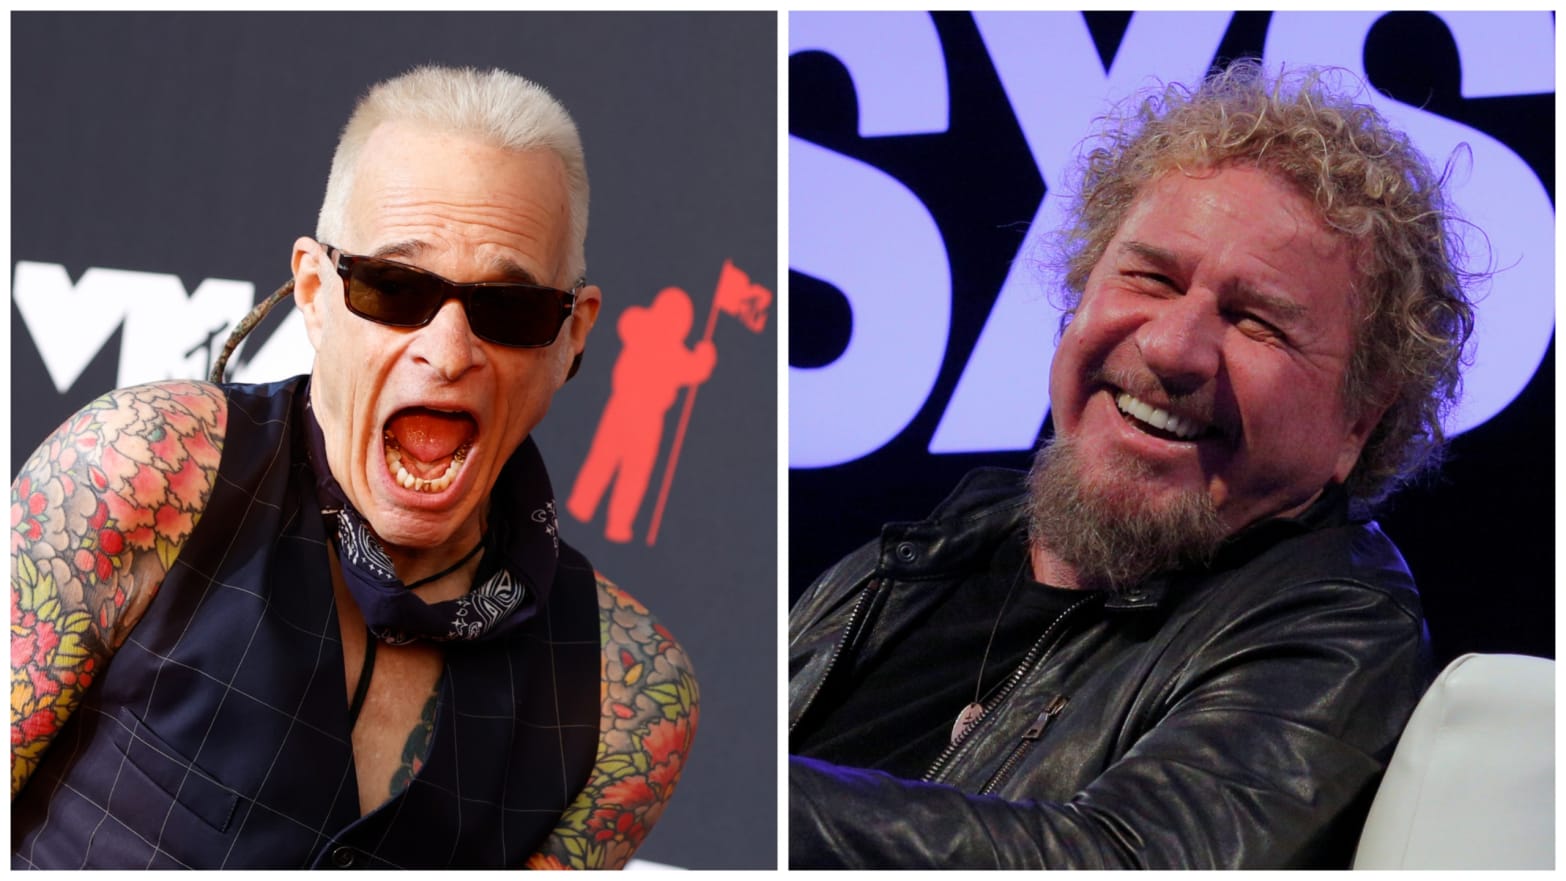 Side-by-side photos of David Lee Roth, left, and Sammy Hagar, right.